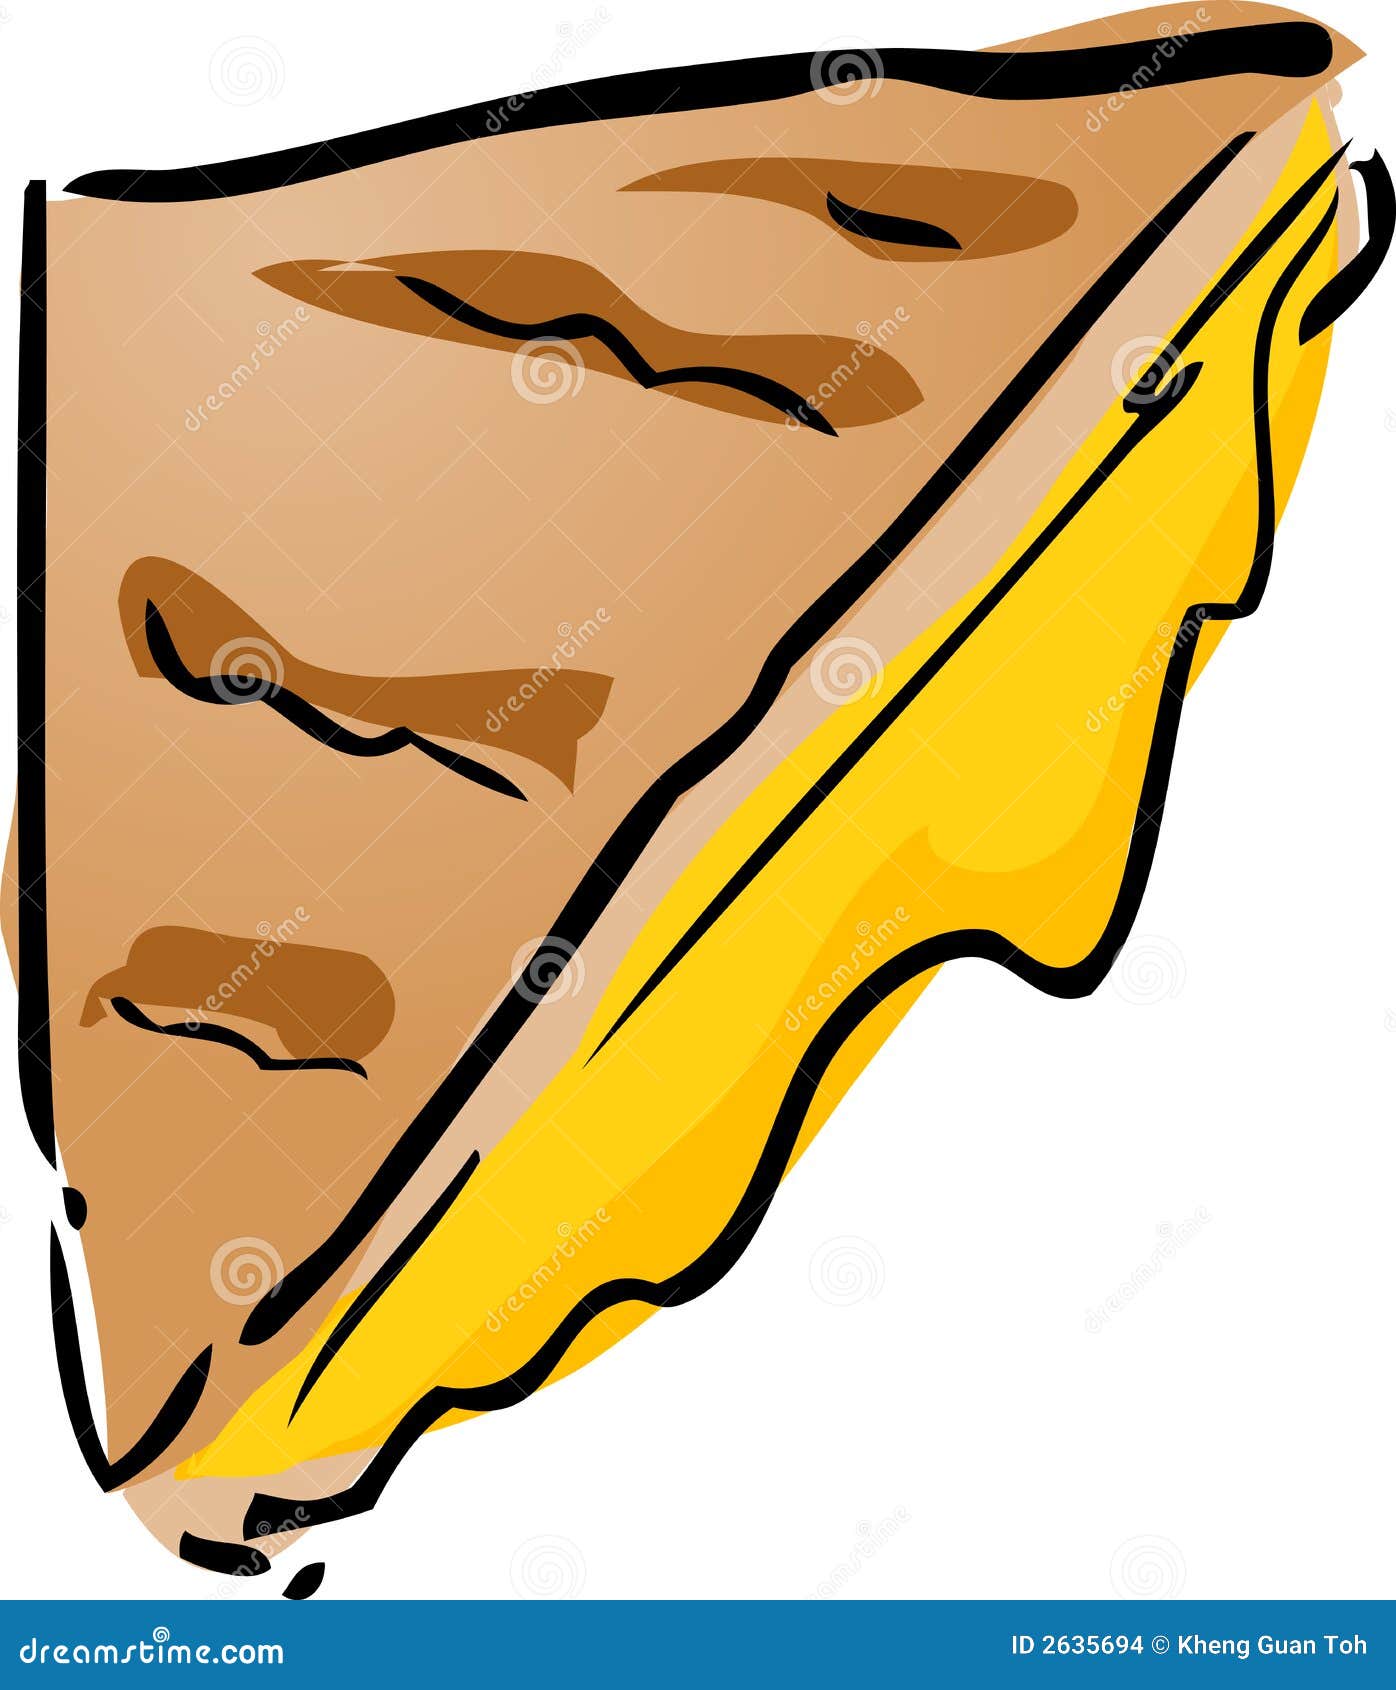 Grilled cheese sandwich stock vector. Illustration of line - 2635694